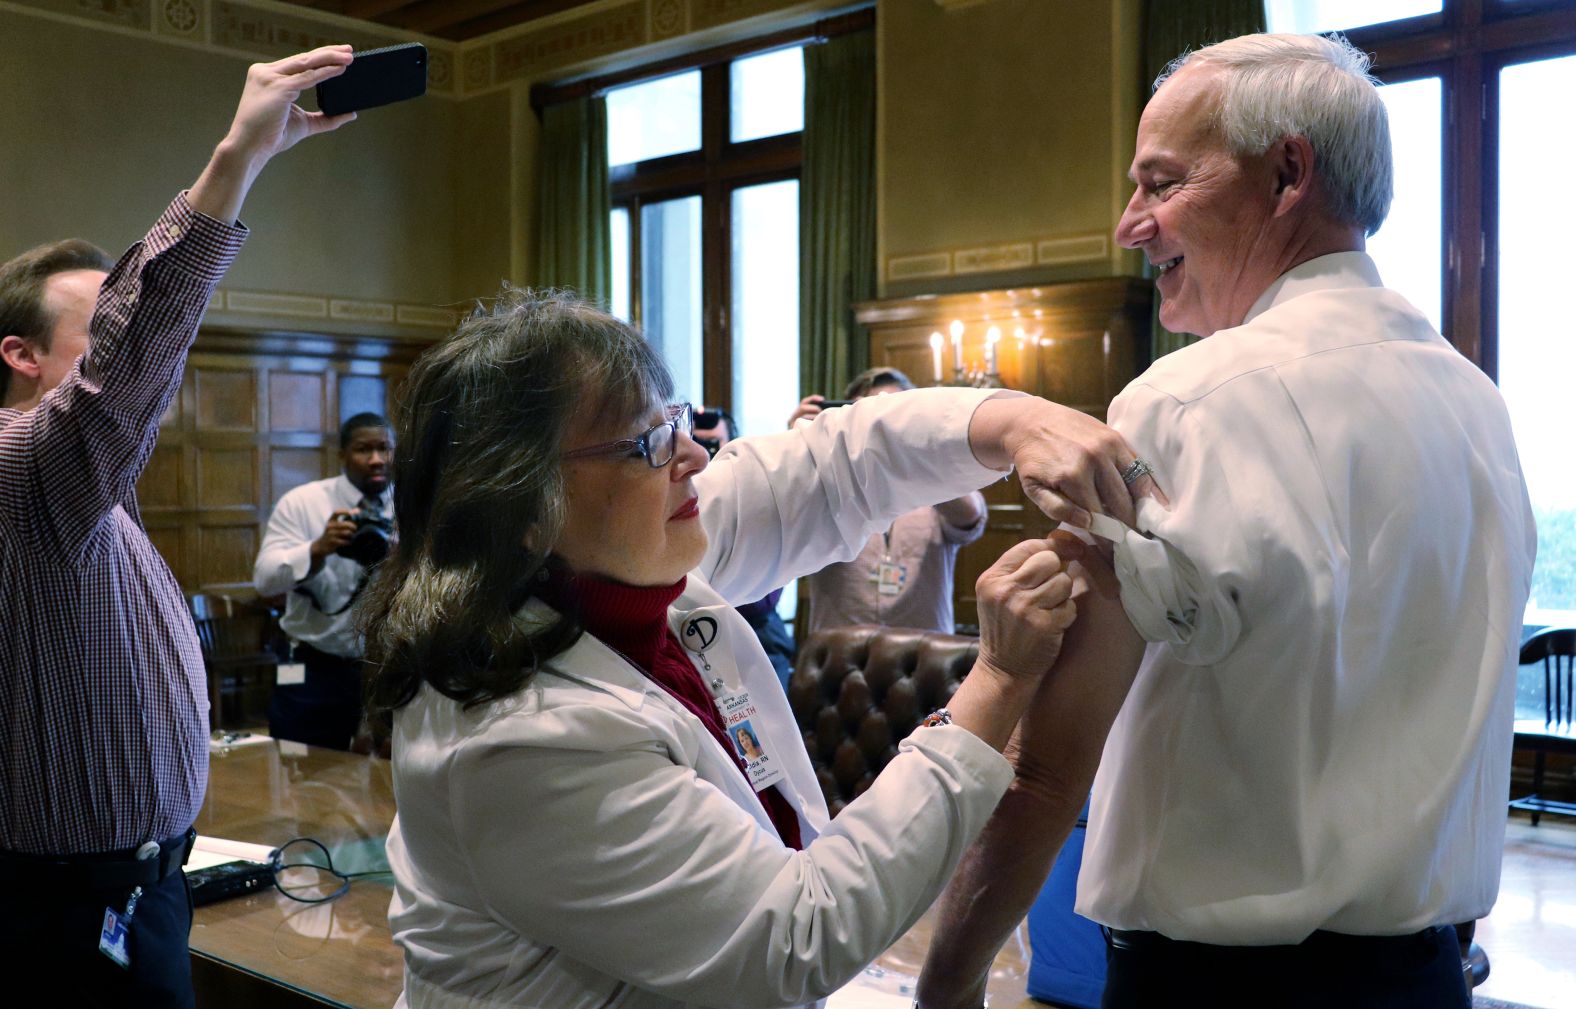 Neldia Dycus, the Central Region director of the Arkansas Department of Health, gives Hutchinson a flu shot at the State Capitol in 2017.